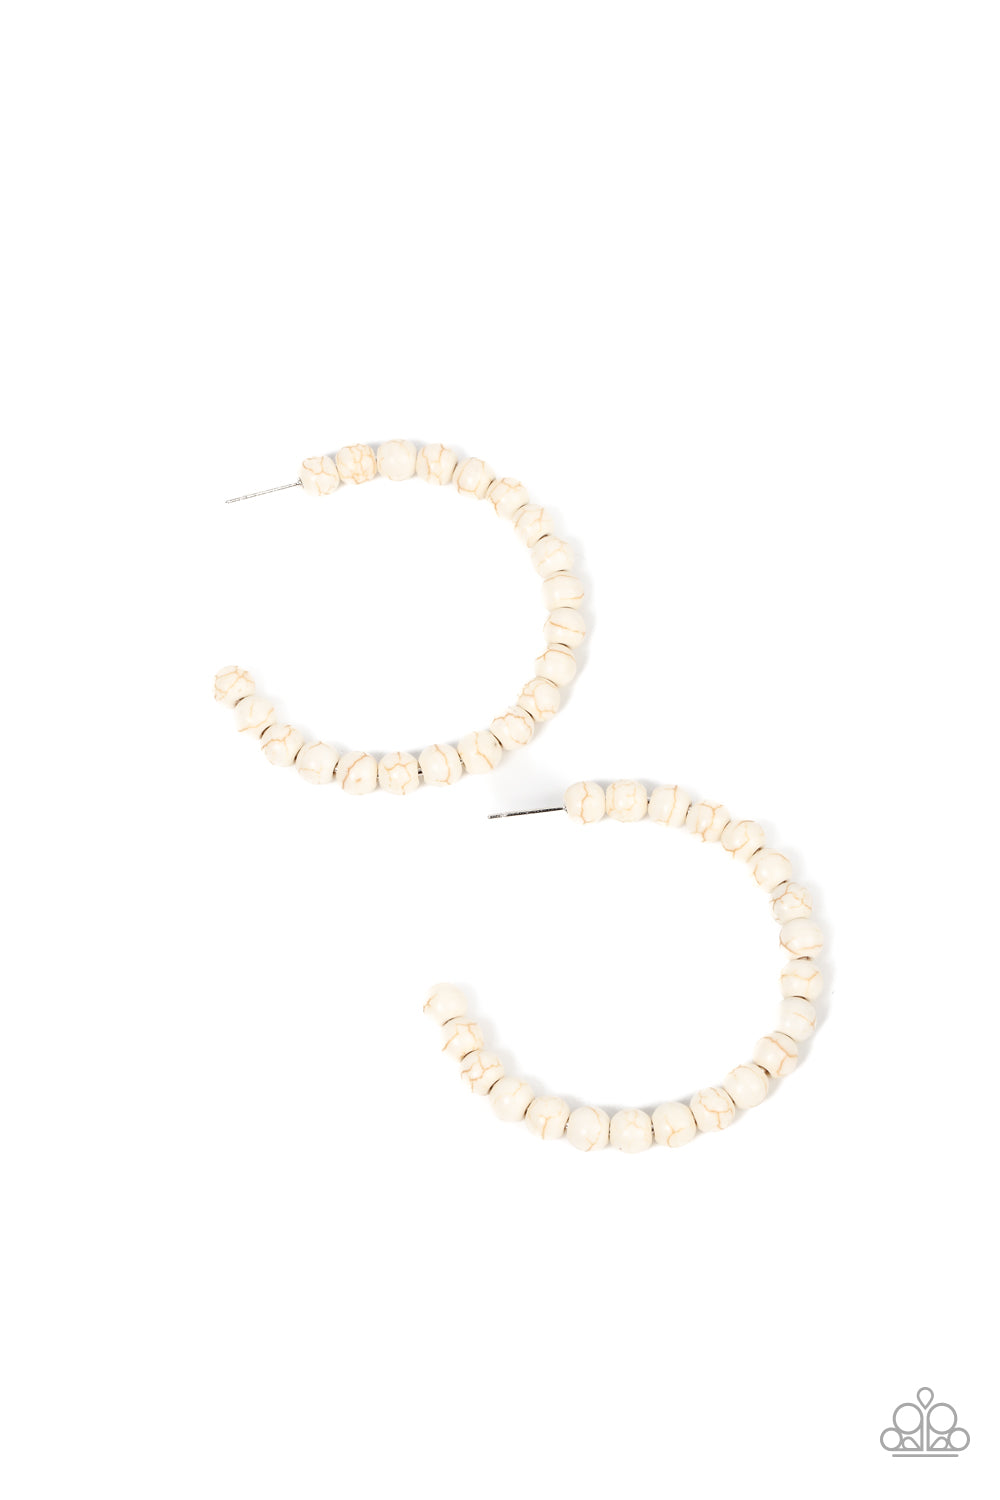 Rural Retrograde White Stone Hoop Earring - Paparazzi Accessories  Earthy white stone beads are threaded along a dainty wire hoop, resulting in an earthy flair. Earring attaches to a standard post fitting. Hoop measures approximately 2" in diameter.  Sold as one pair of hoop earrings.  P5HO-WTXX-103XX